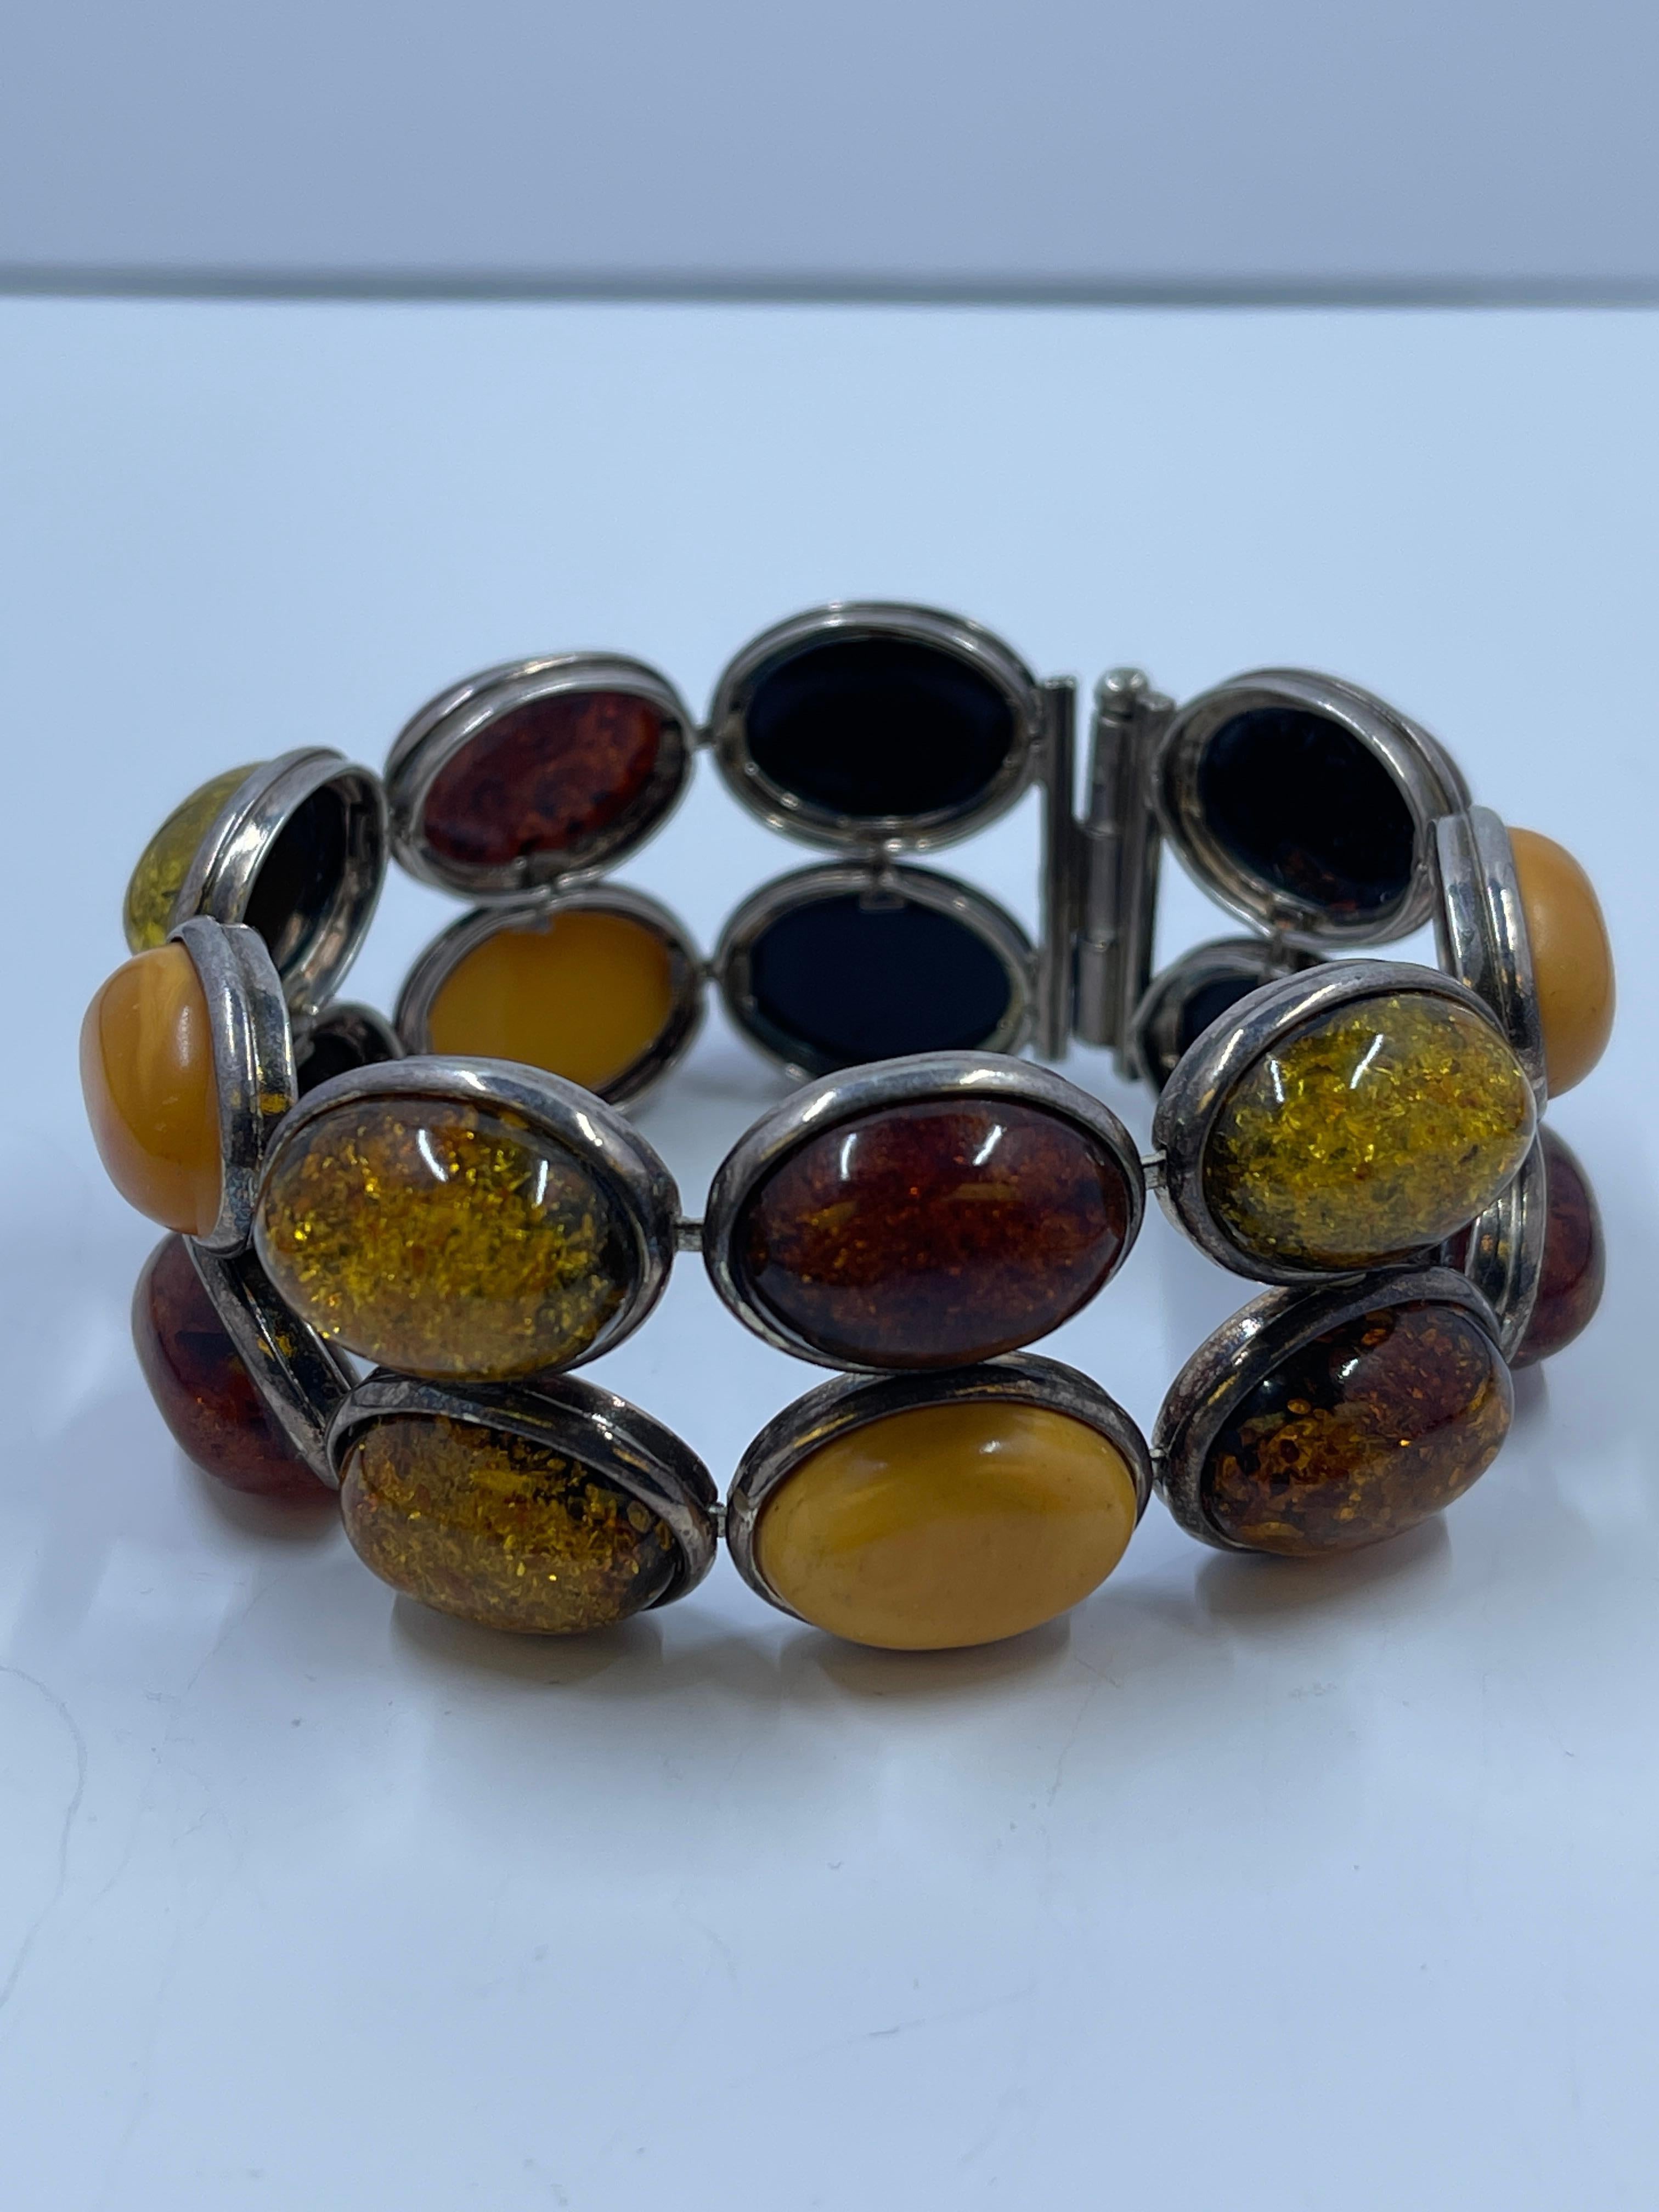 Vintage baltic amber and sterling silver bracelet. Good preowned vintage condition. Measures approximately 7 1/2